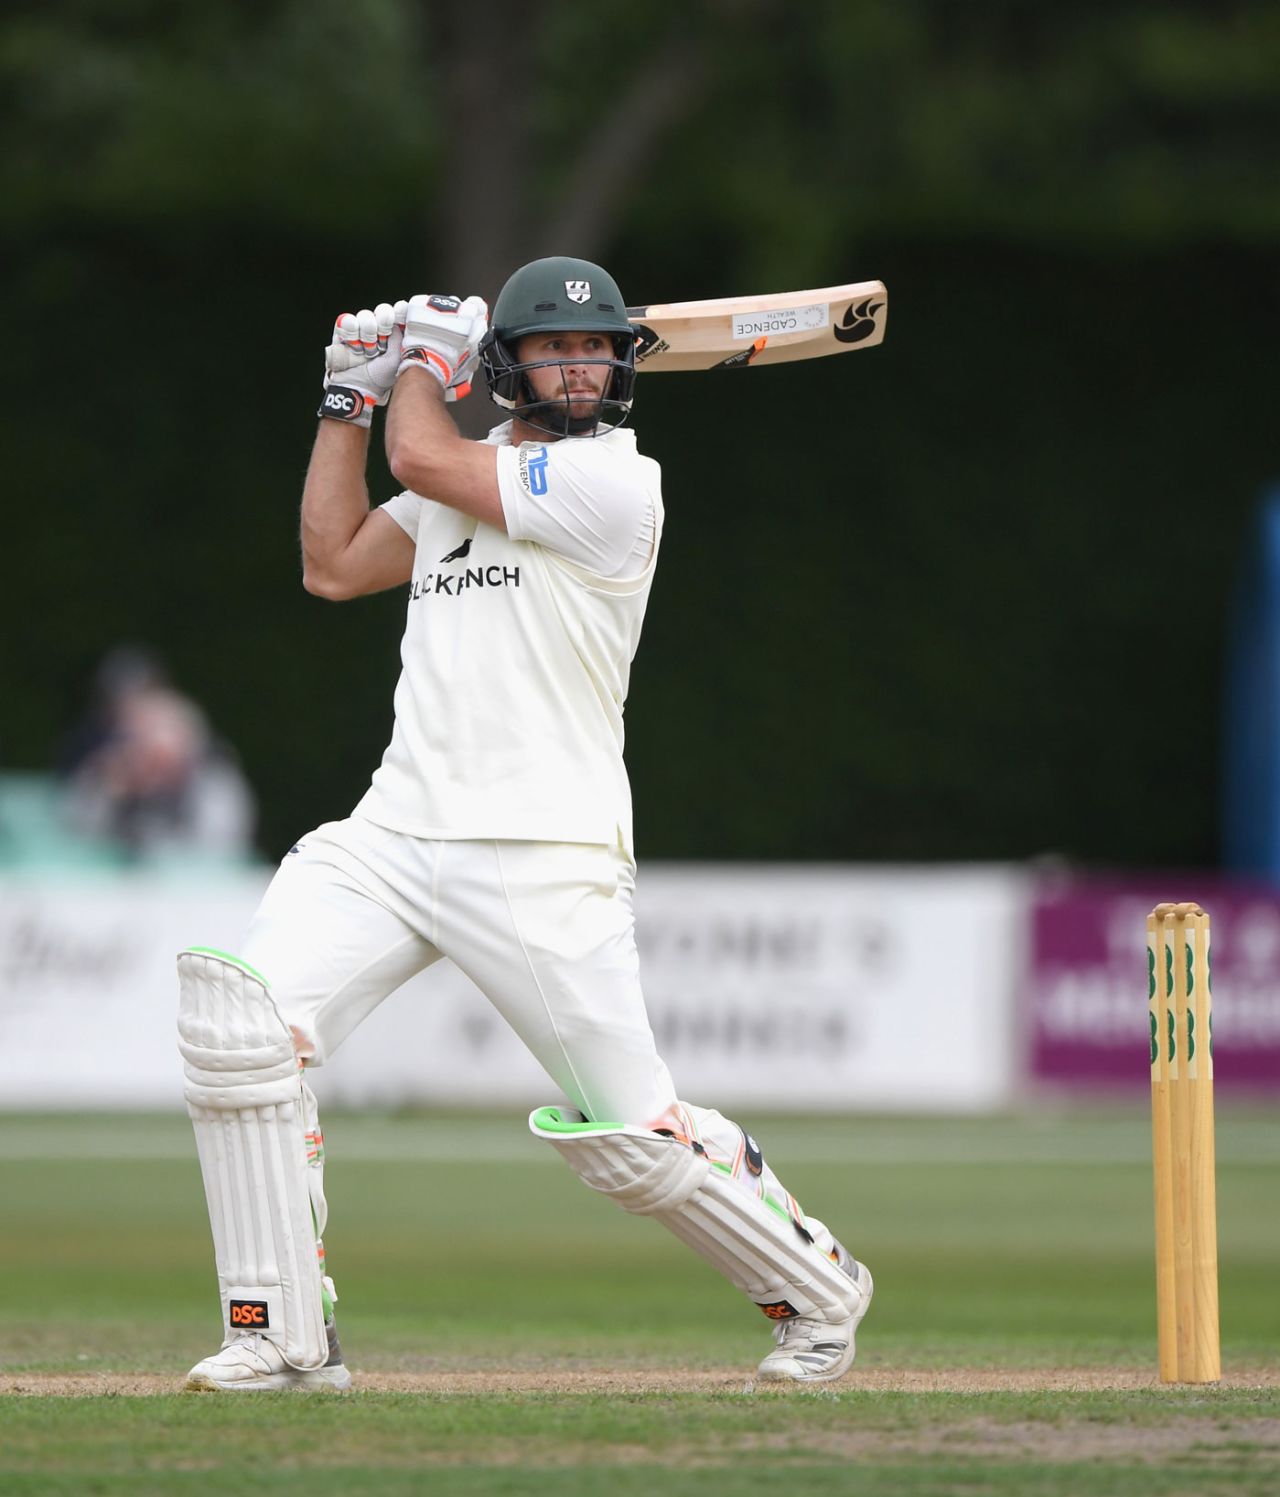 Ross Whiteley cuts during his half-century, Worcestershire v Surrey, County Championship, Division One, New Road, September 10, 2018